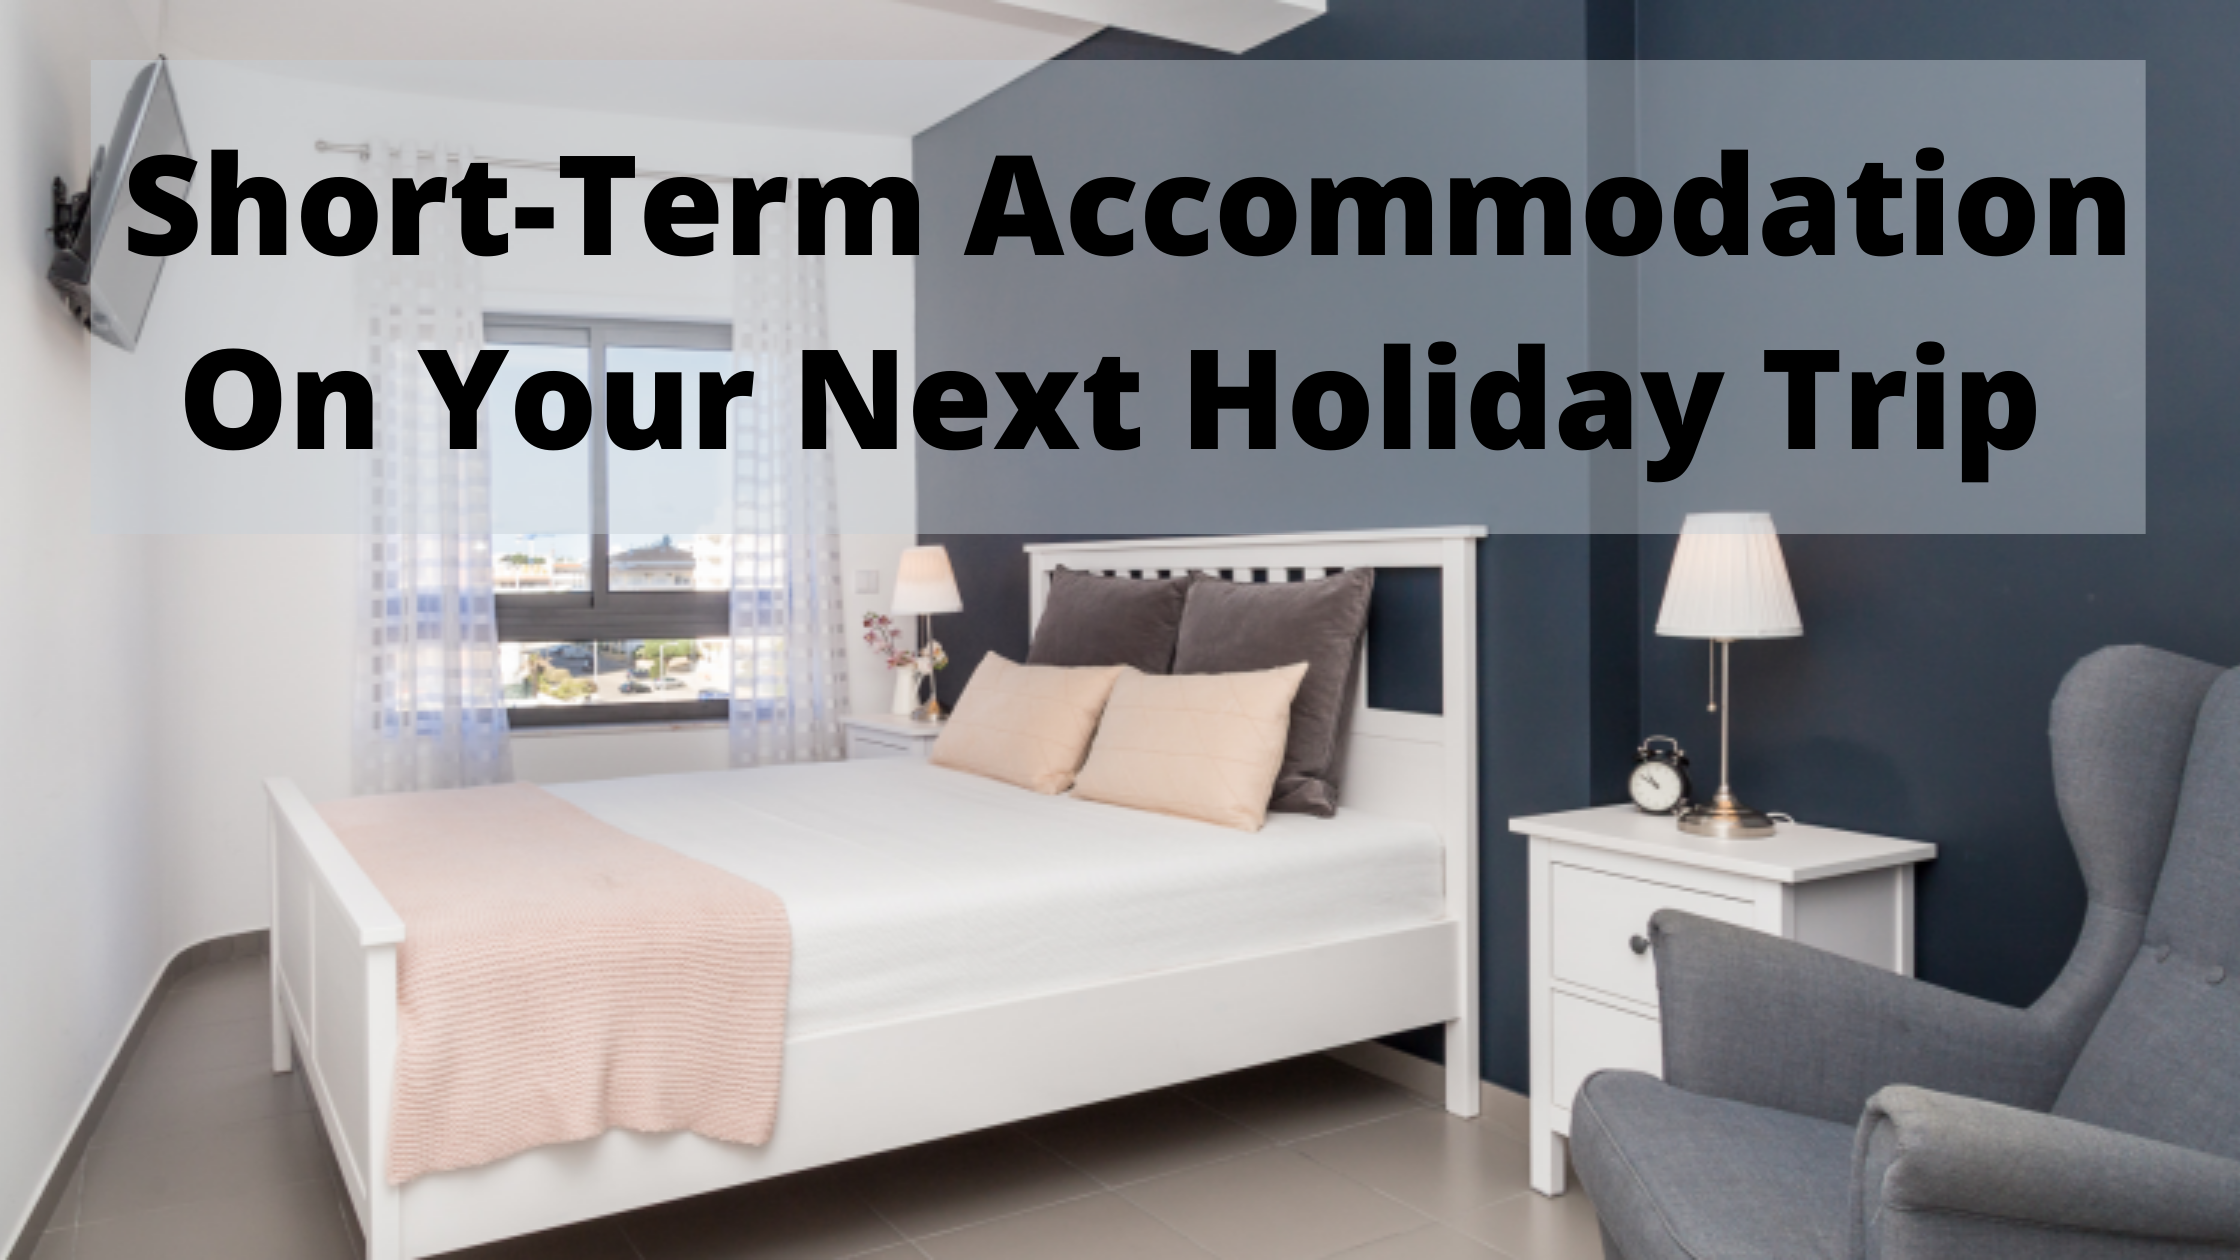 Go For Your Lettings Short-Term Accommodation on Your Next Holiday Trip 